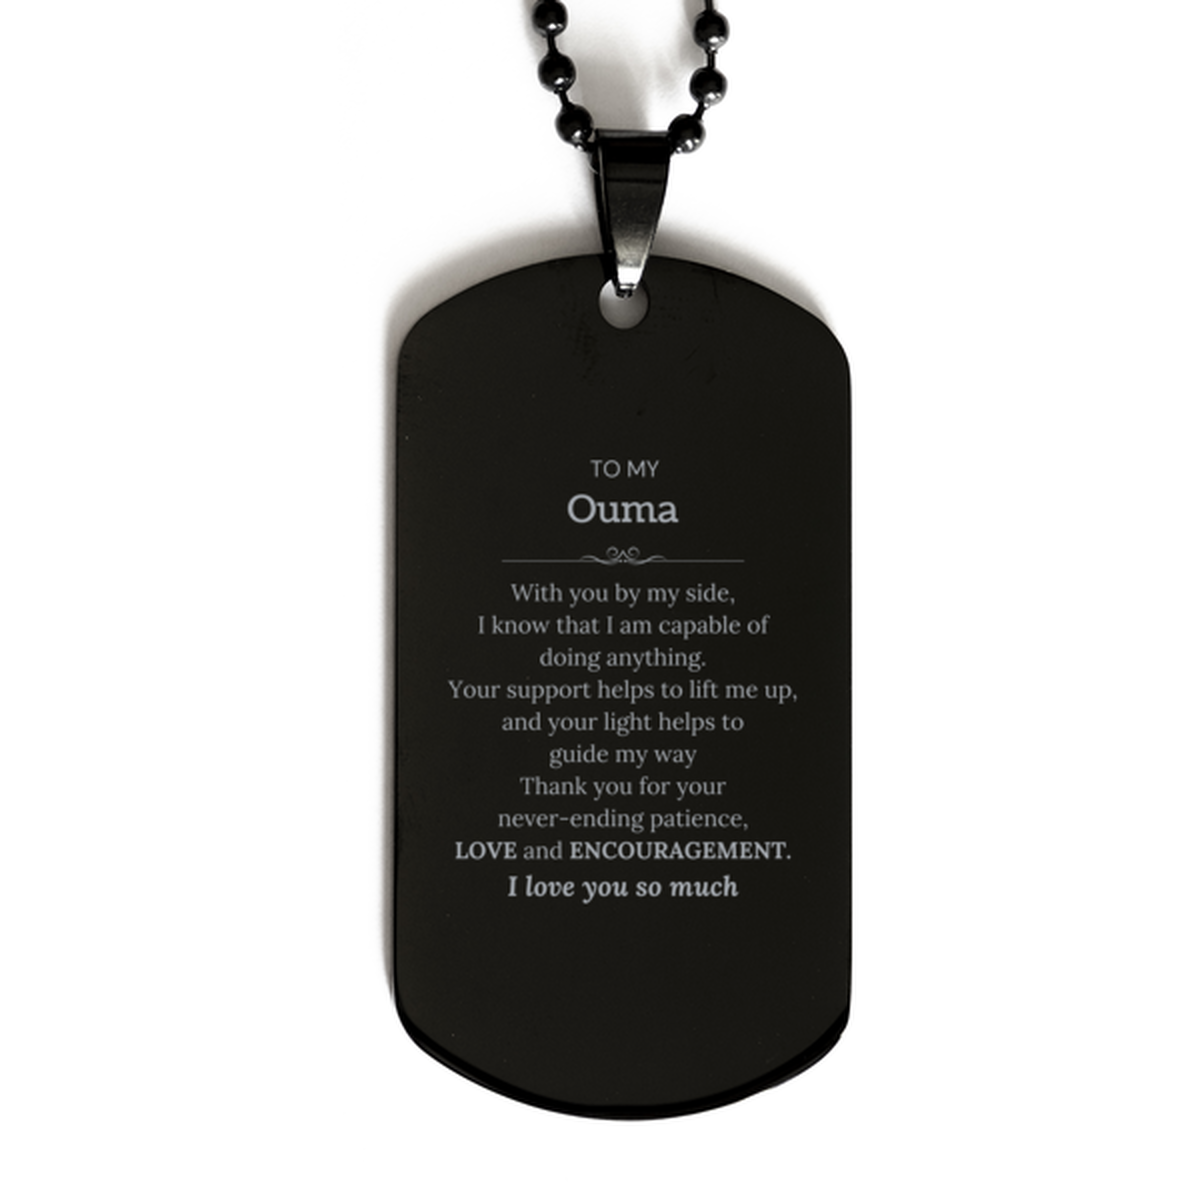 Appreciation Ouma Black Dog Tag Gifts, To My Ouma Birthday Christmas Wedding Keepsake Gifts for Ouma With you by my side, I know that I am capable of doing anything. I love you so much